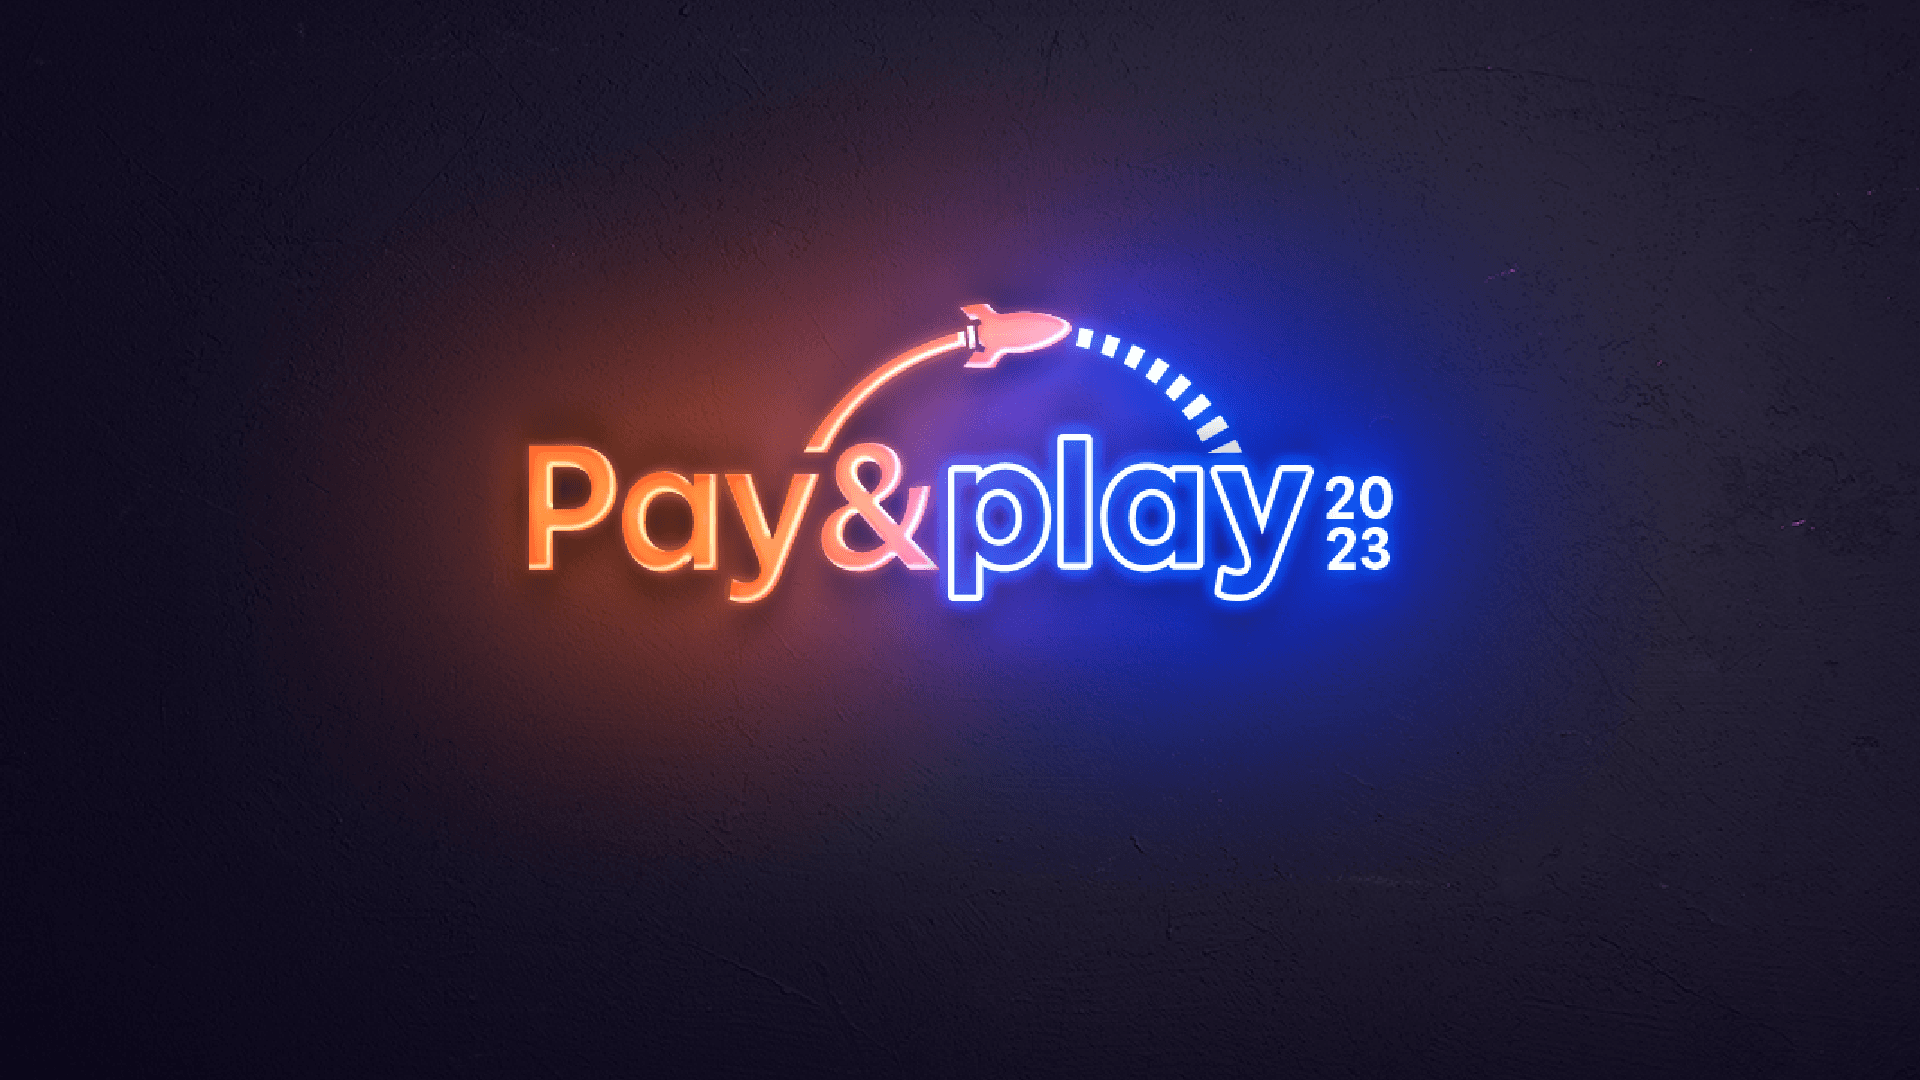 Pay & Play event banner